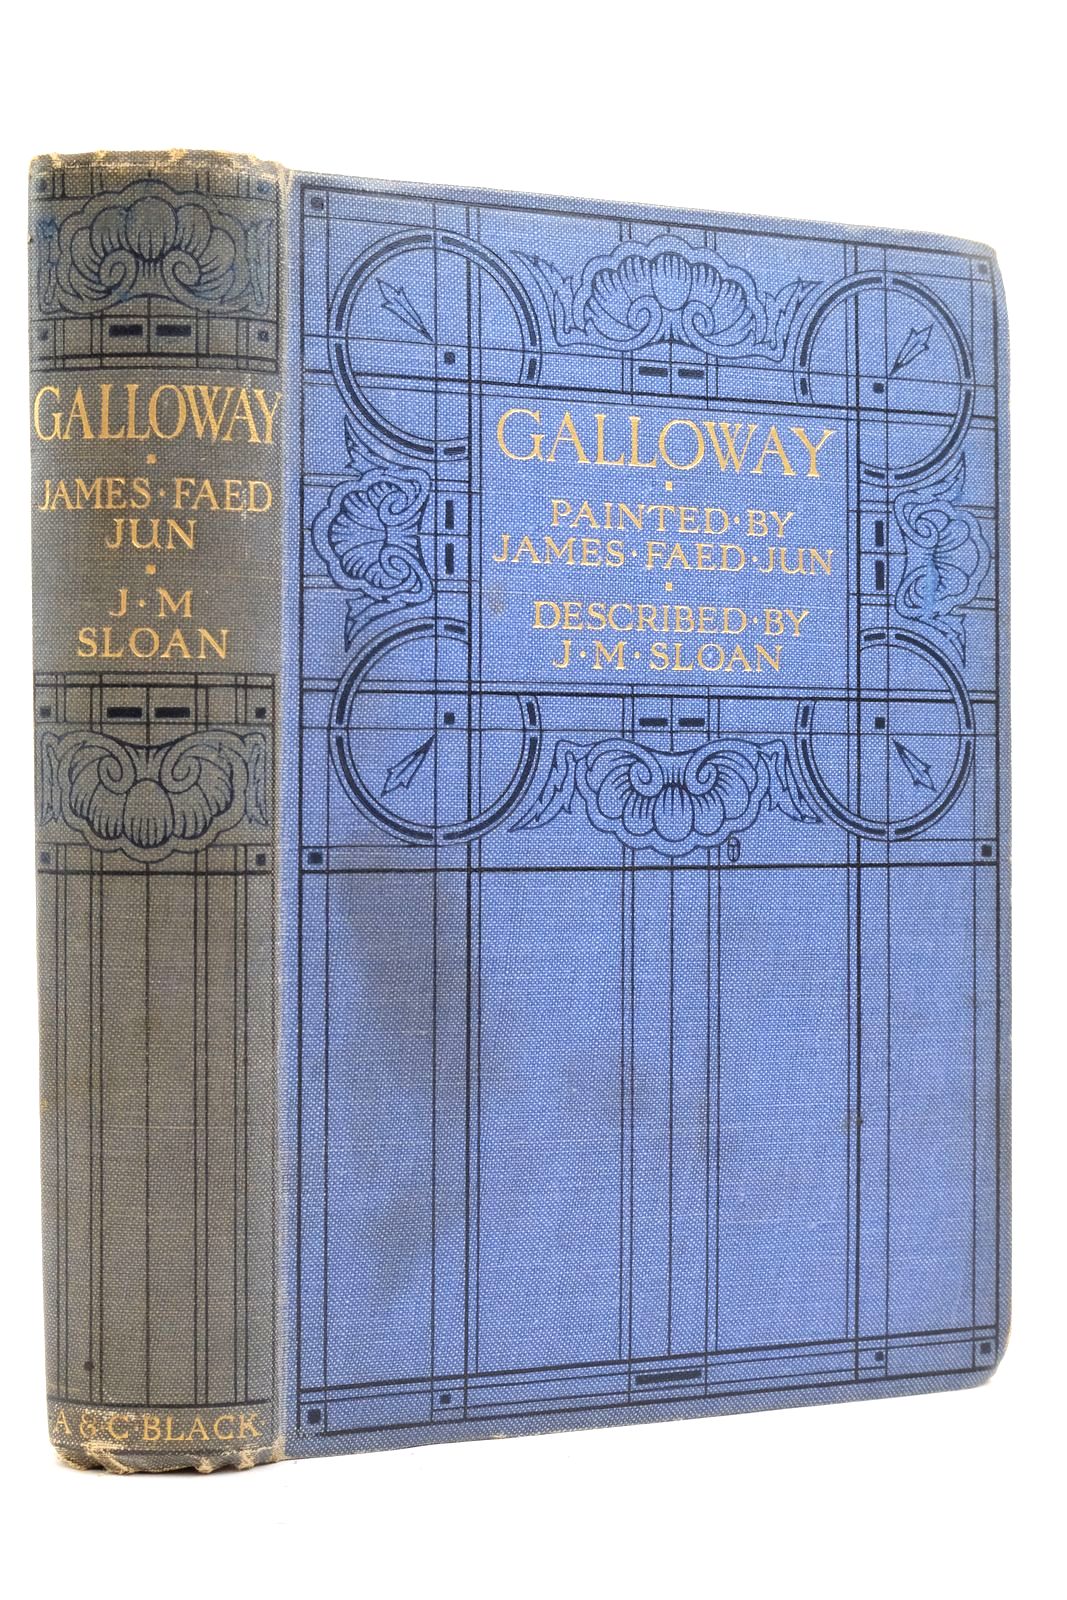 Photo of GALLOWAY written by Sloan, J.M. illustrated by Faed, James published by Adam & Charles Black (STOCK CODE: 2137585)  for sale by Stella & Rose's Books